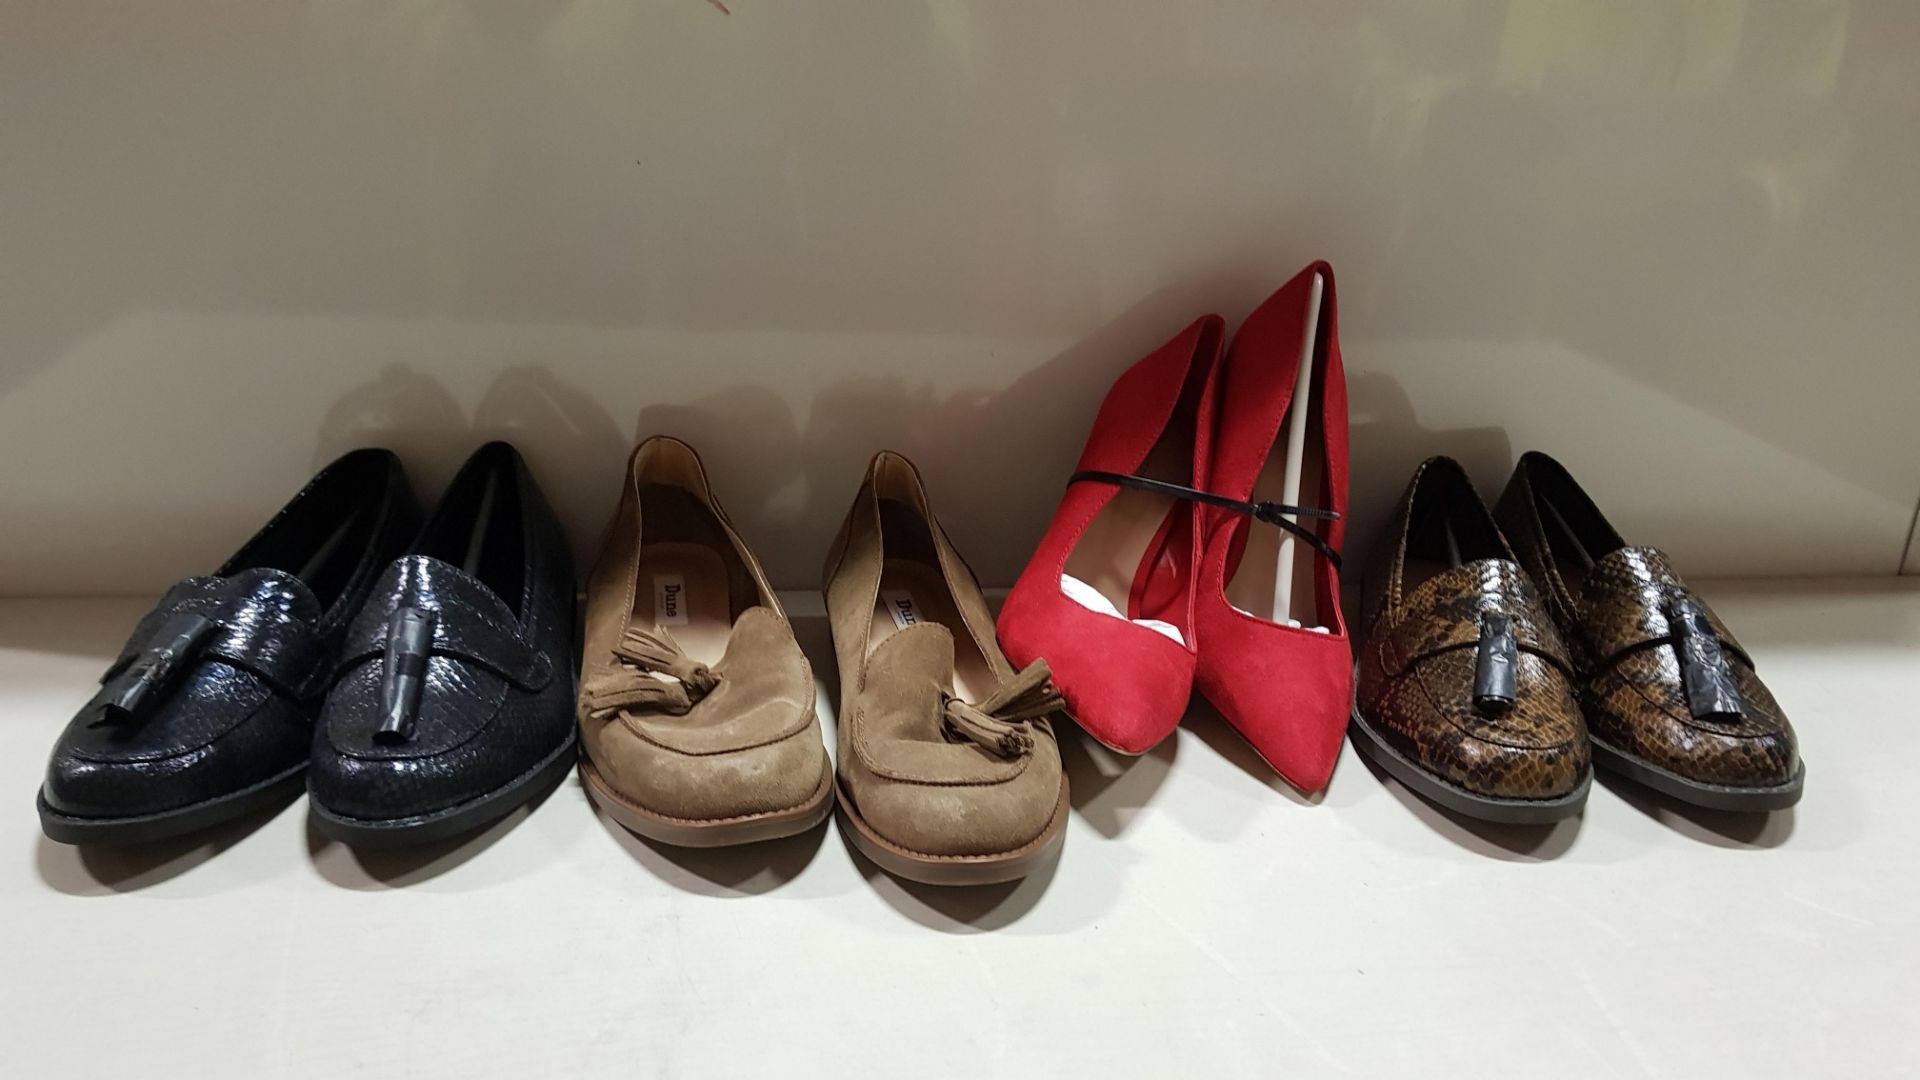 22 X BRAND NEW WOMEN'S SHOES IN VARIOUS SIZES, STYLES AND COLOURS - REISS, SOUL CALI & CO, DUNE.